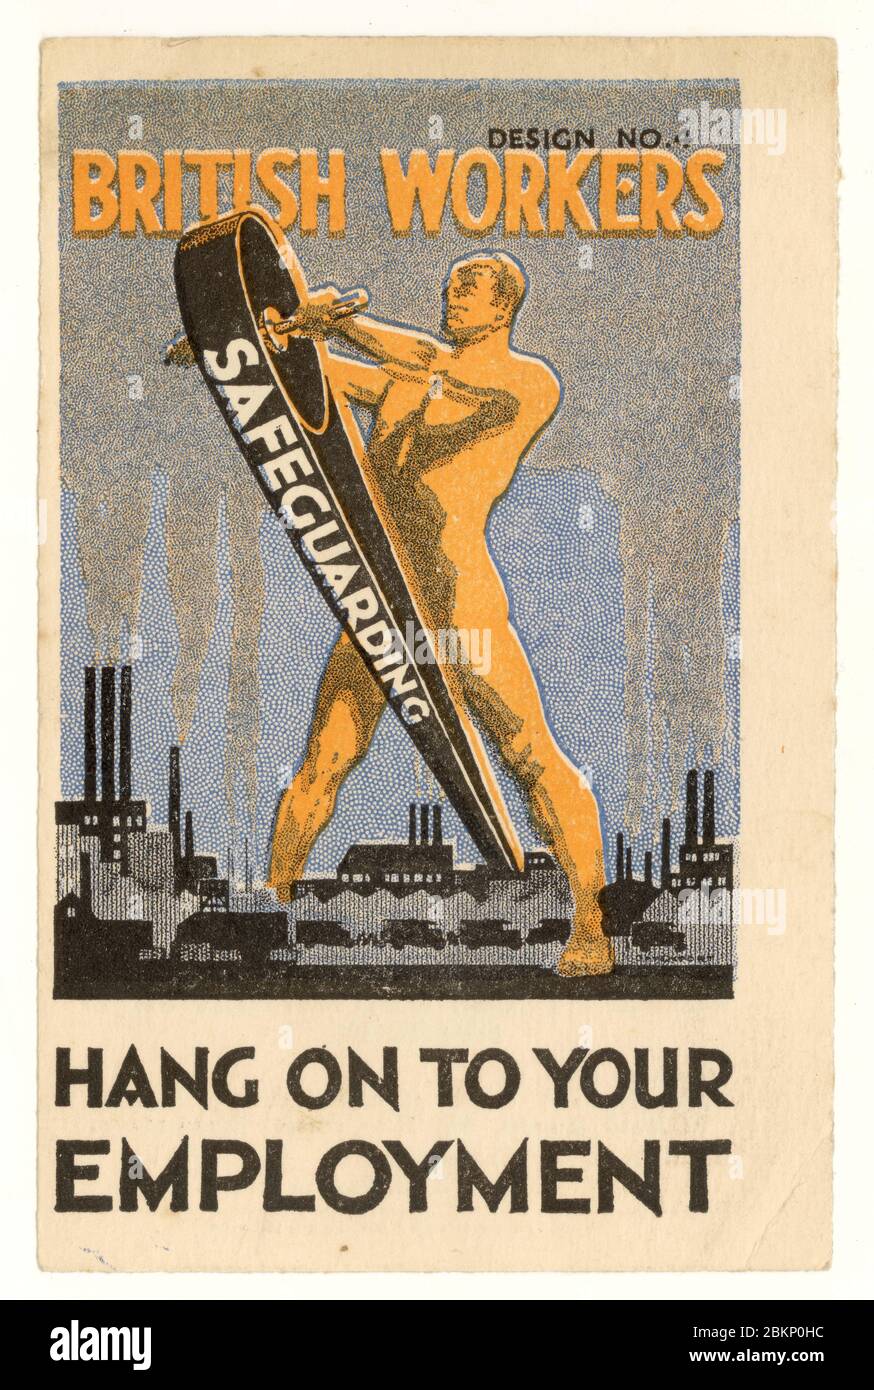 Original Inter war period leaflet printed by the National Union of Manufacturers urging British Workers to hang onto their employment by supporting those who support the safeguarding of industry (protectionist policies) 'Safeguarding of industry means safeguarding of  employment' it states on the reverse.  As an example of safeguarding, it gives the British  tyre manufacturing industry which was safeguarded and employed many British workers. Printed in Birmingham, U.K. around the time of the financial crash and subsequent Great Depression, circa 1929-1932 . Stock Photo